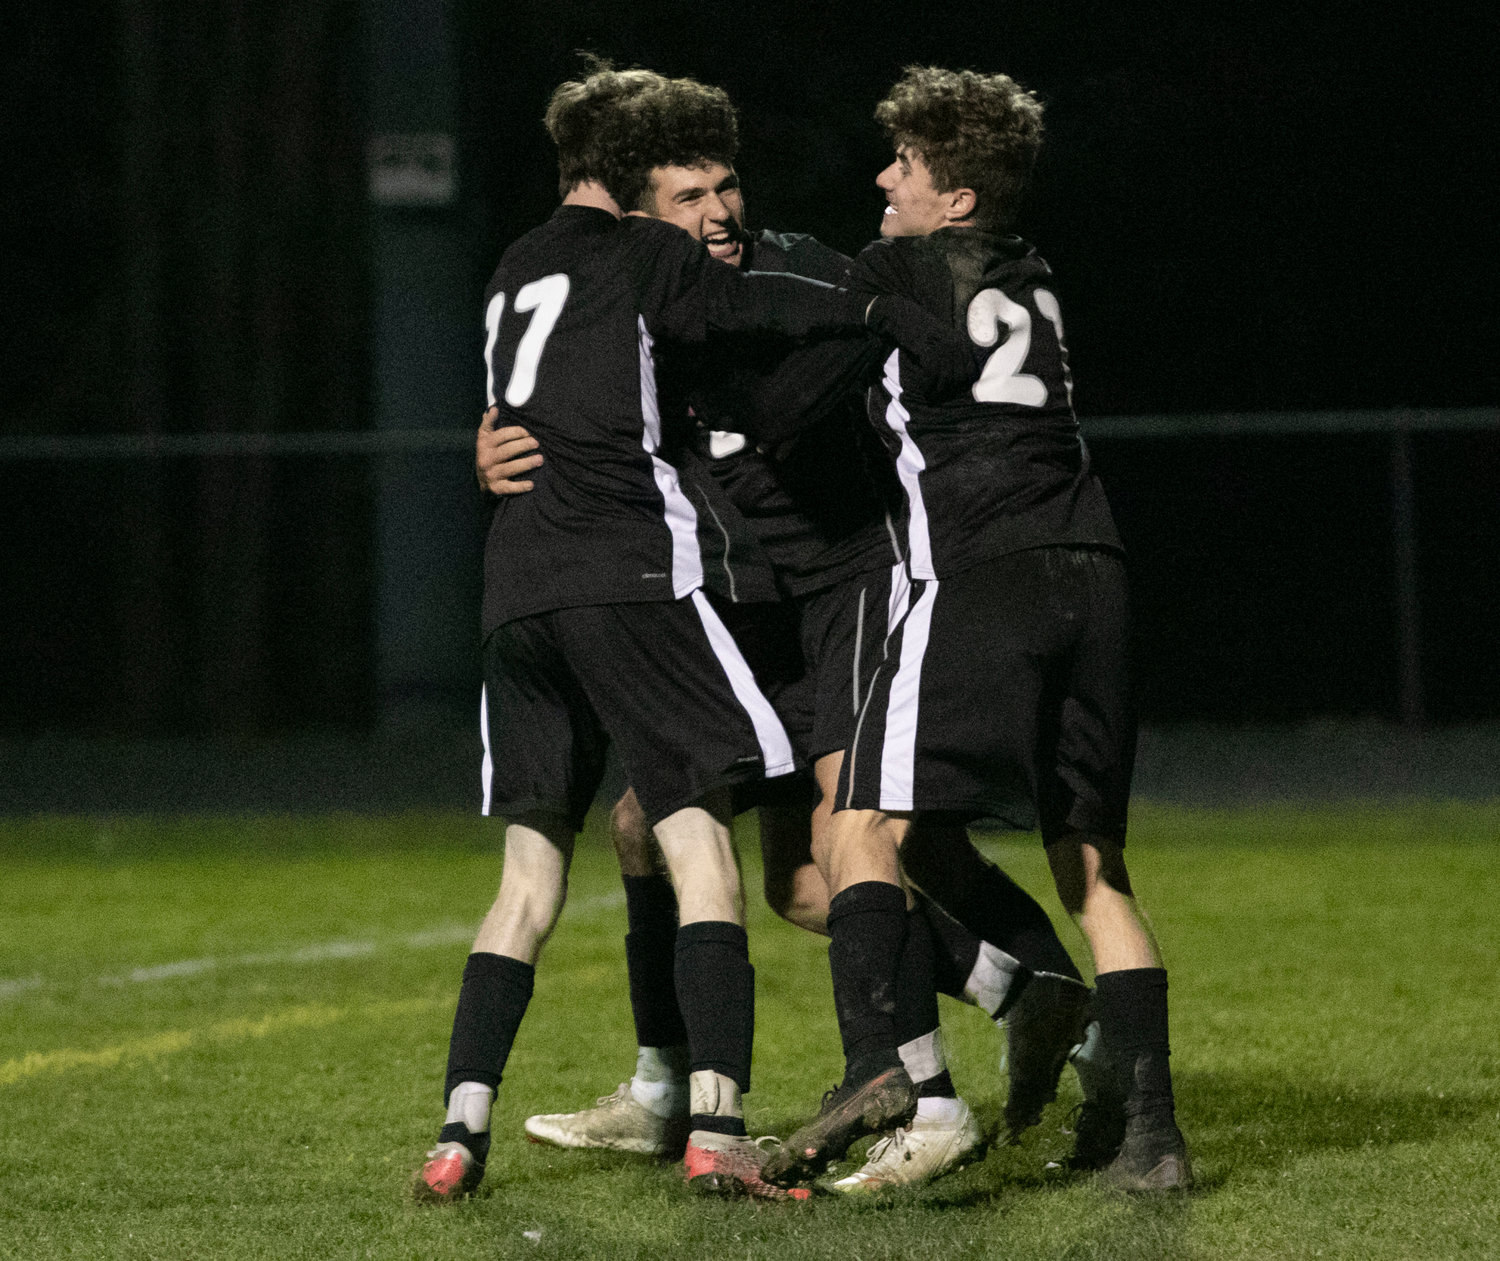 Dylan Brol (left) and Justin Mendes (right) give Parker Camelo a big hug after he scored to give Mt. Hope a 2-0 lead in the second half. The Huskies went on to beat Cranston West, 3-0 and move on the the semifinals.